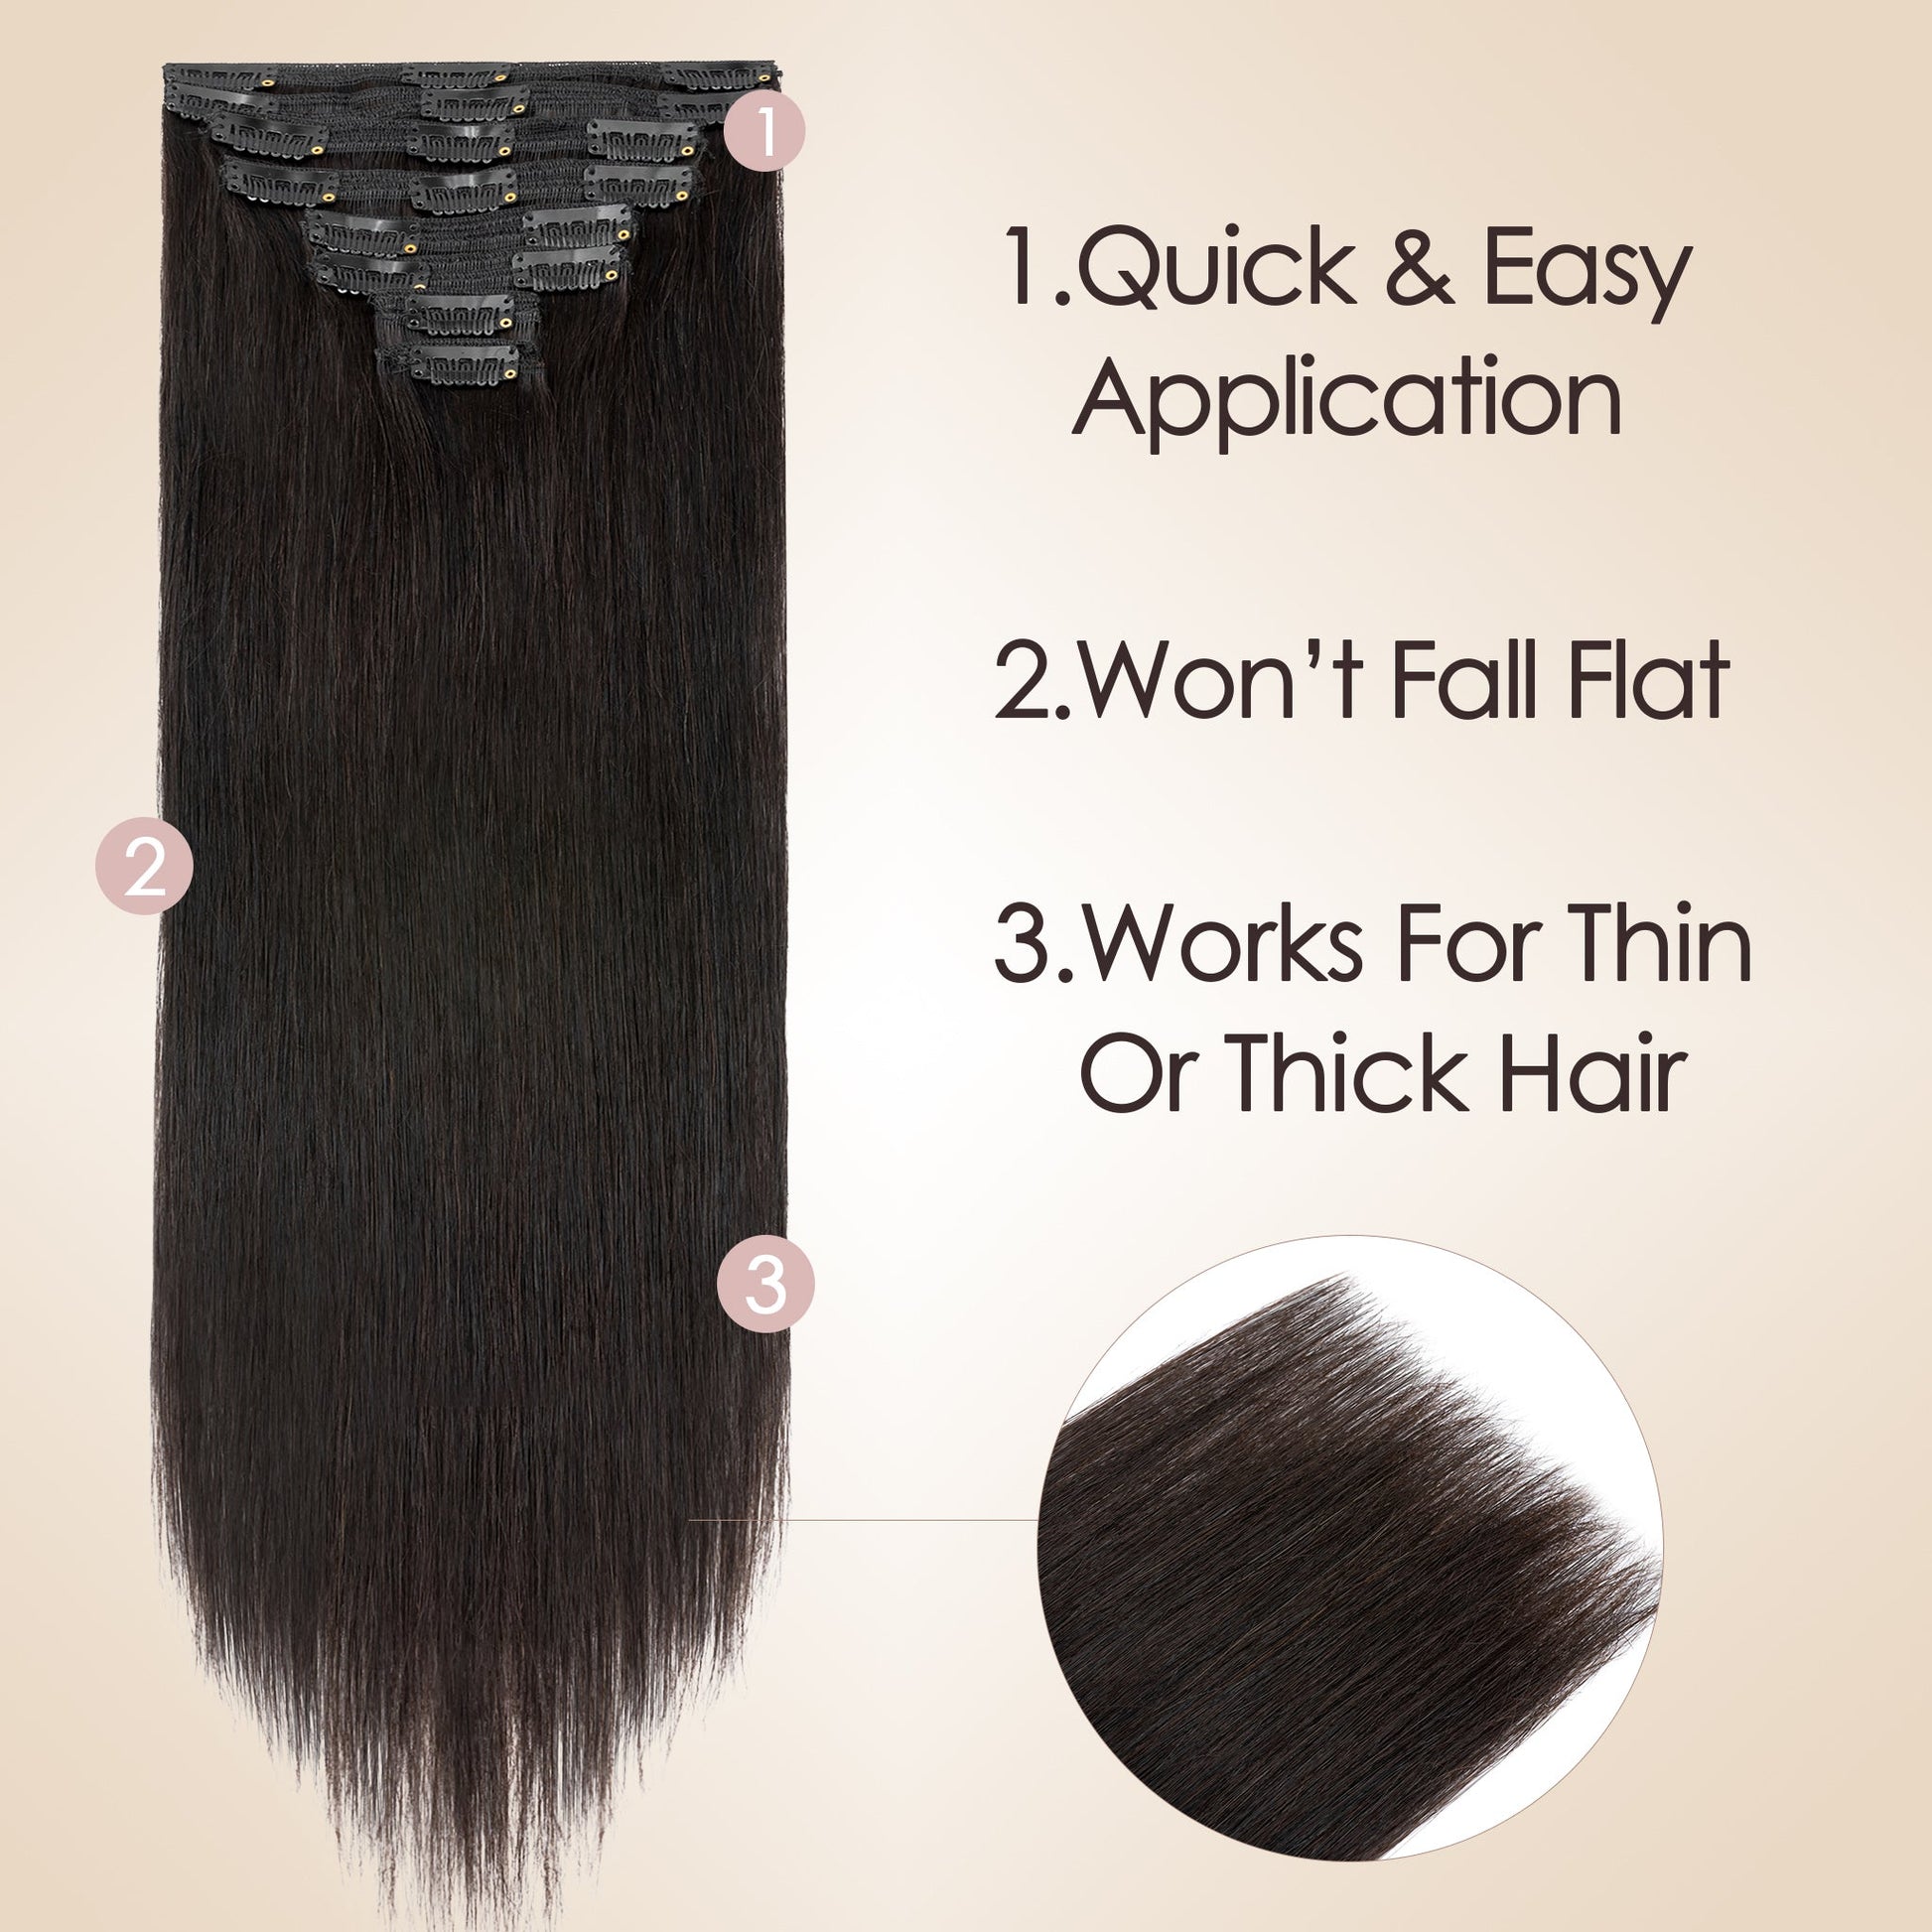 Double Wefts Natural Black Clip In Hair Extensions 8 PCS segohair.com